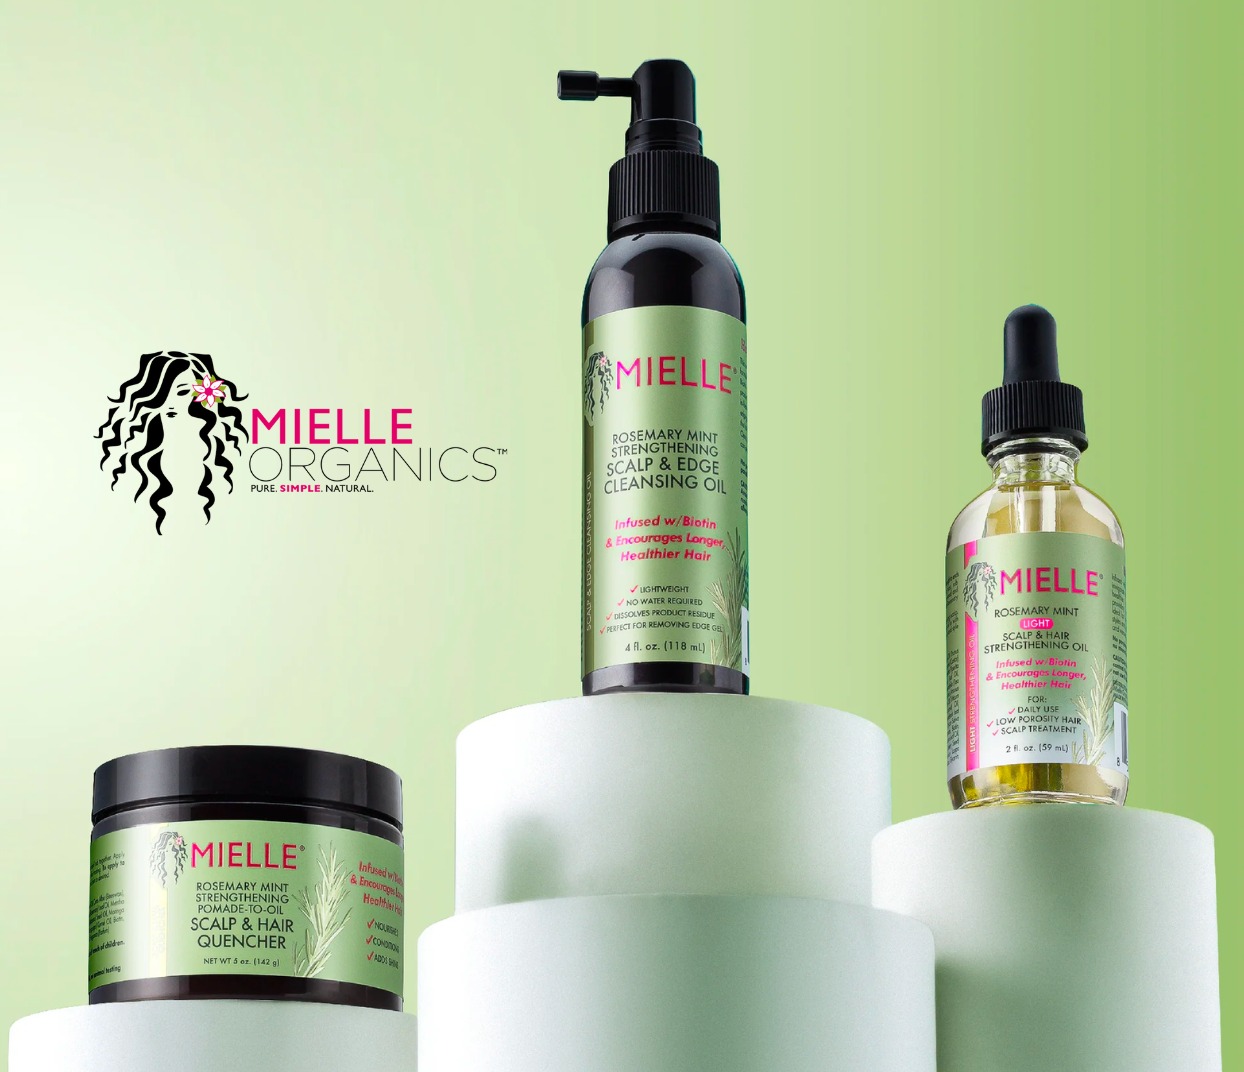 mielle products range